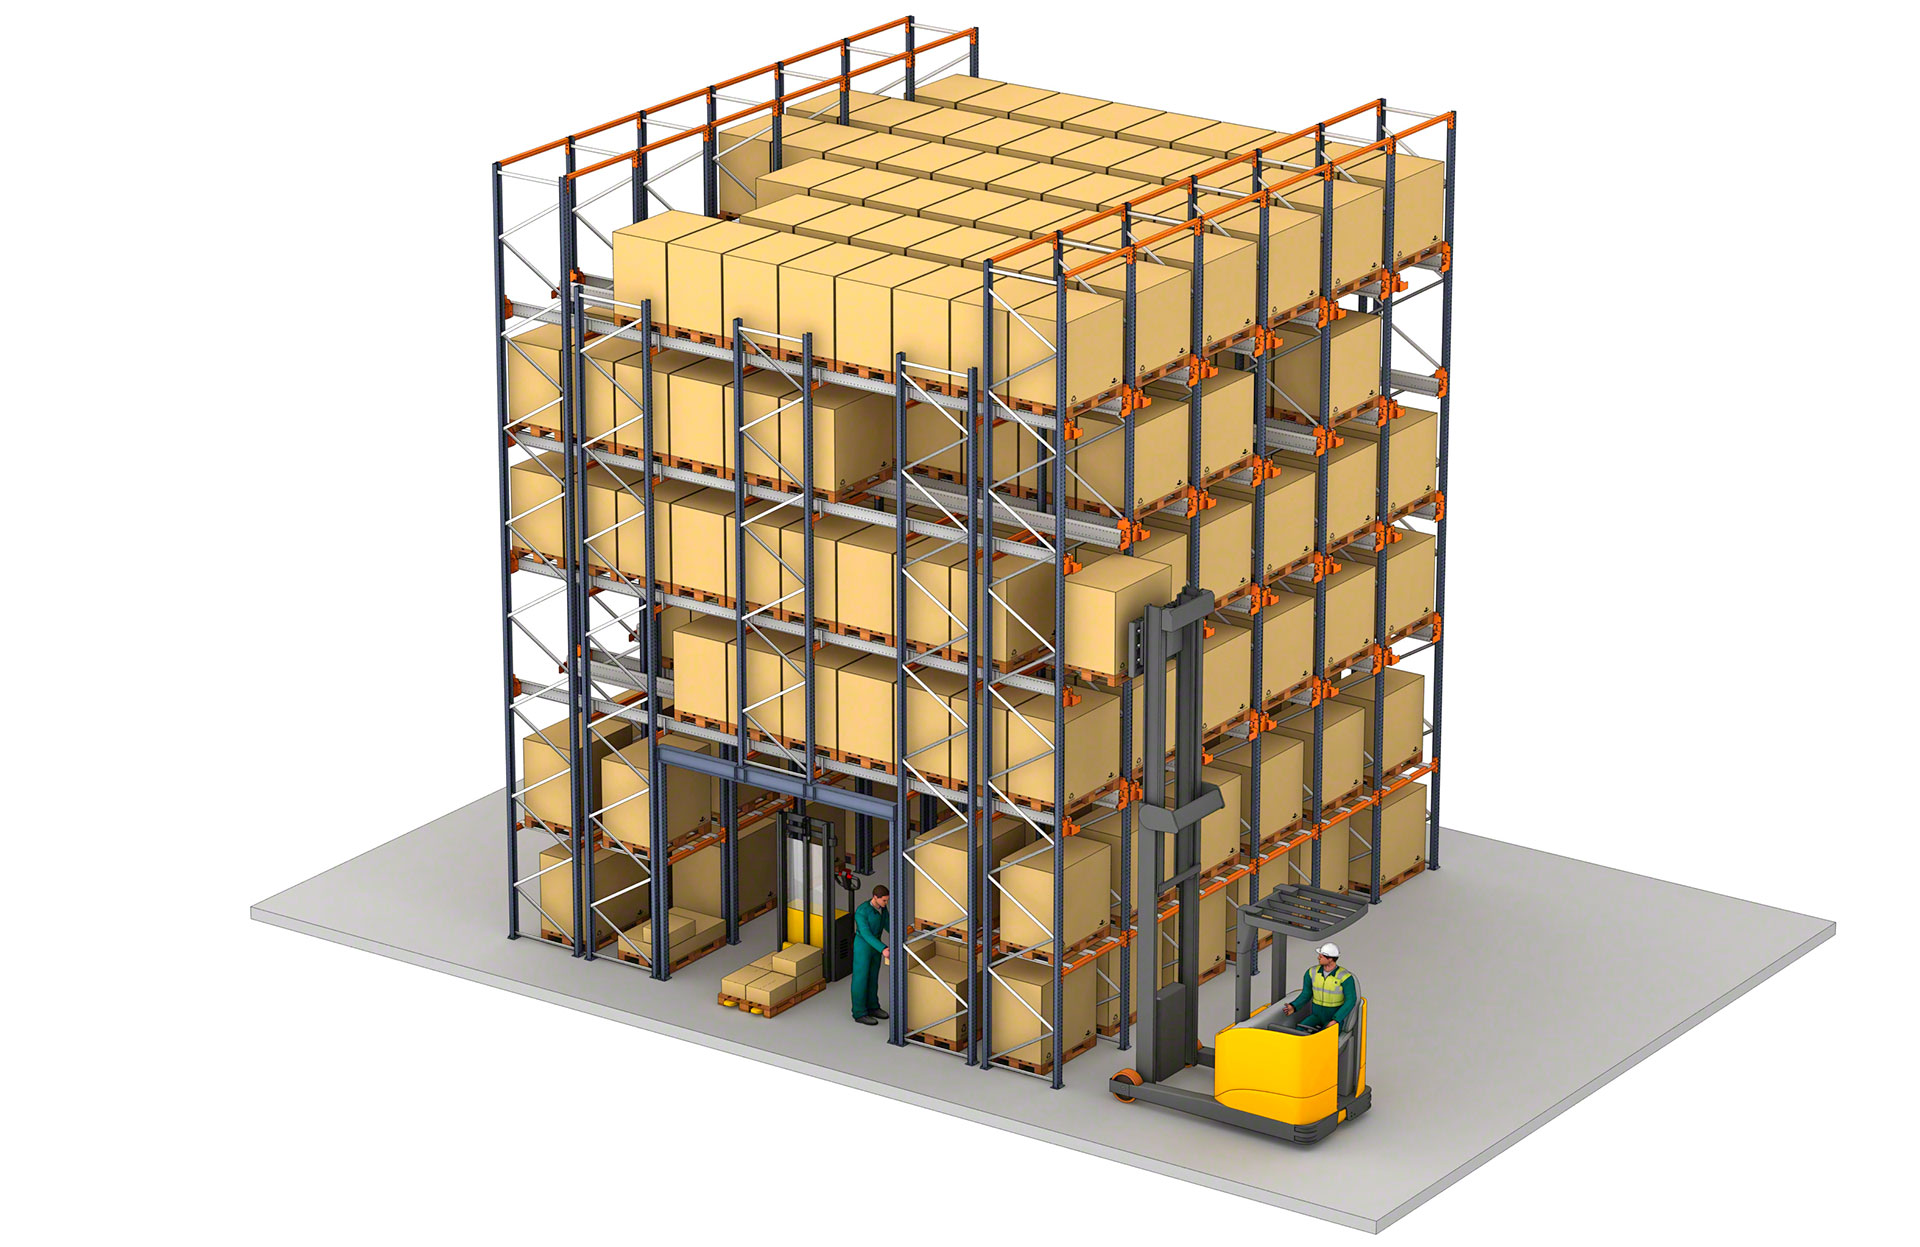 The lower level can be allocated to picking from pallets